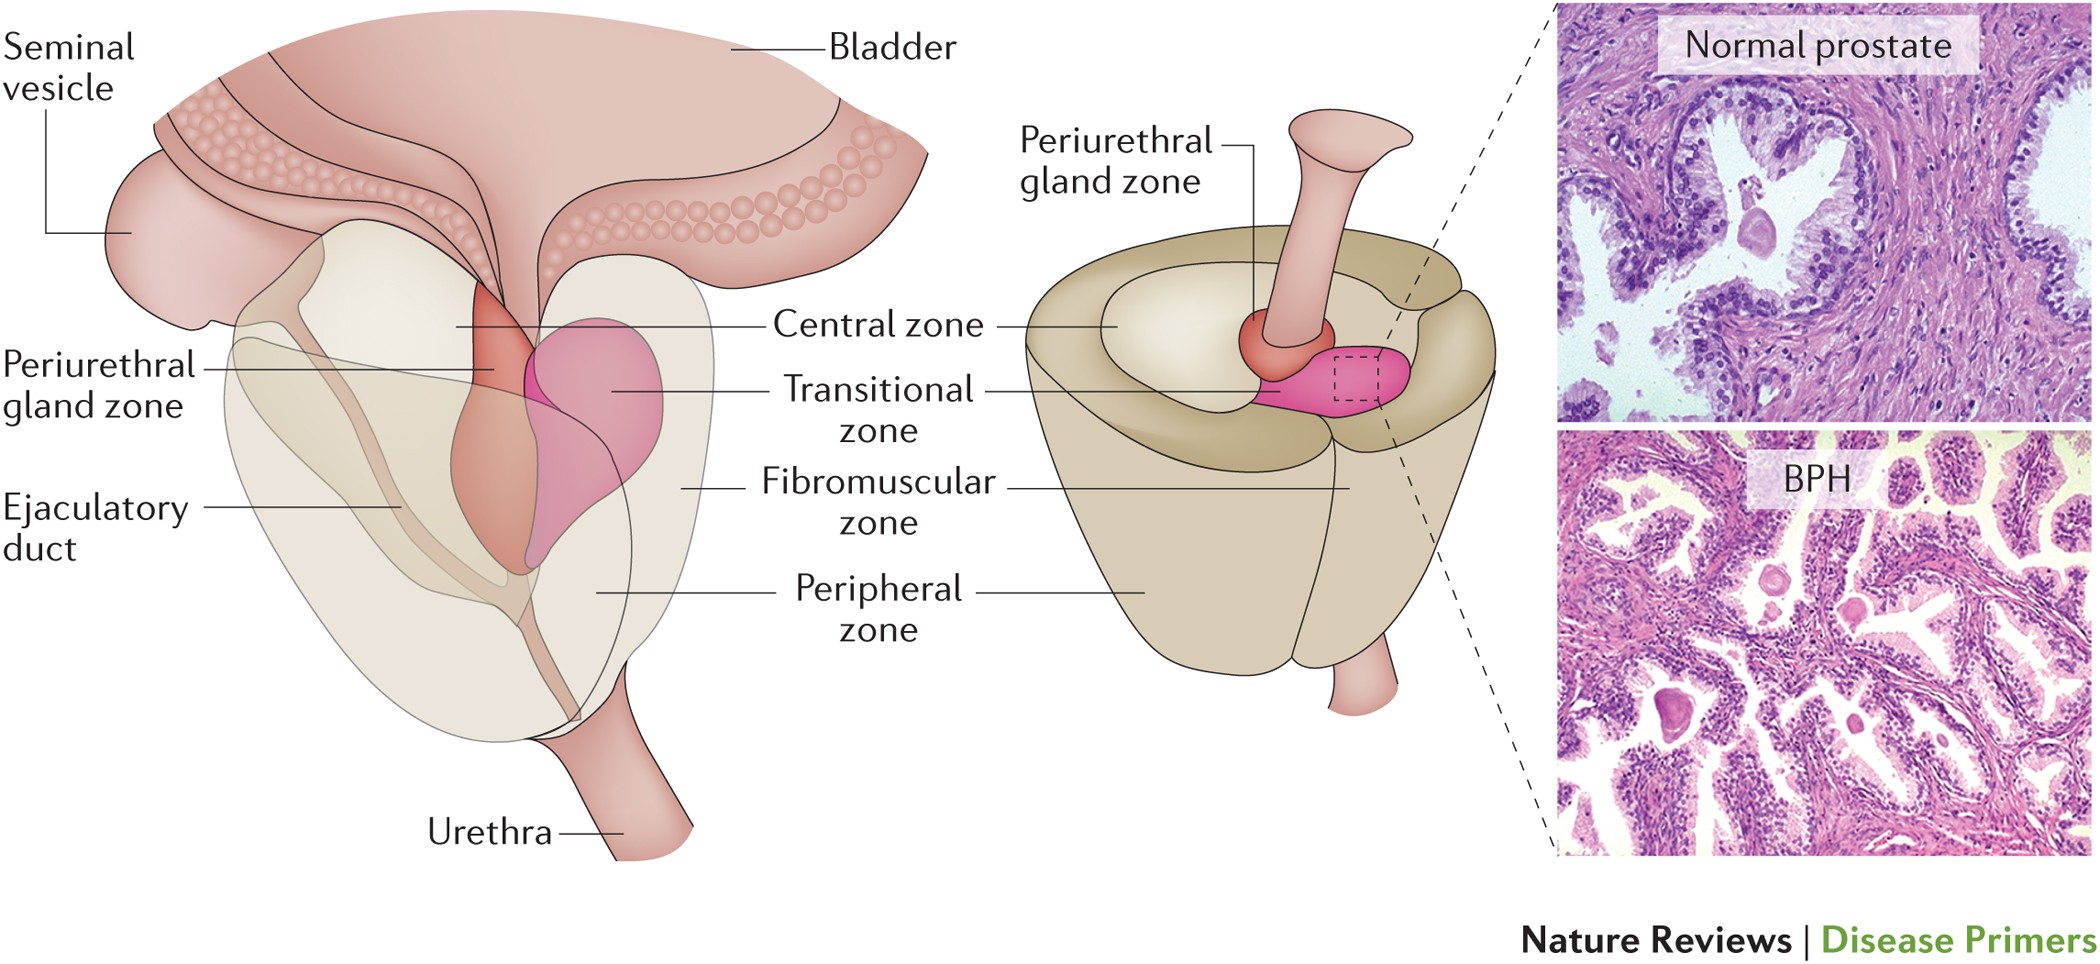 prostate adenoma signs and symptoms